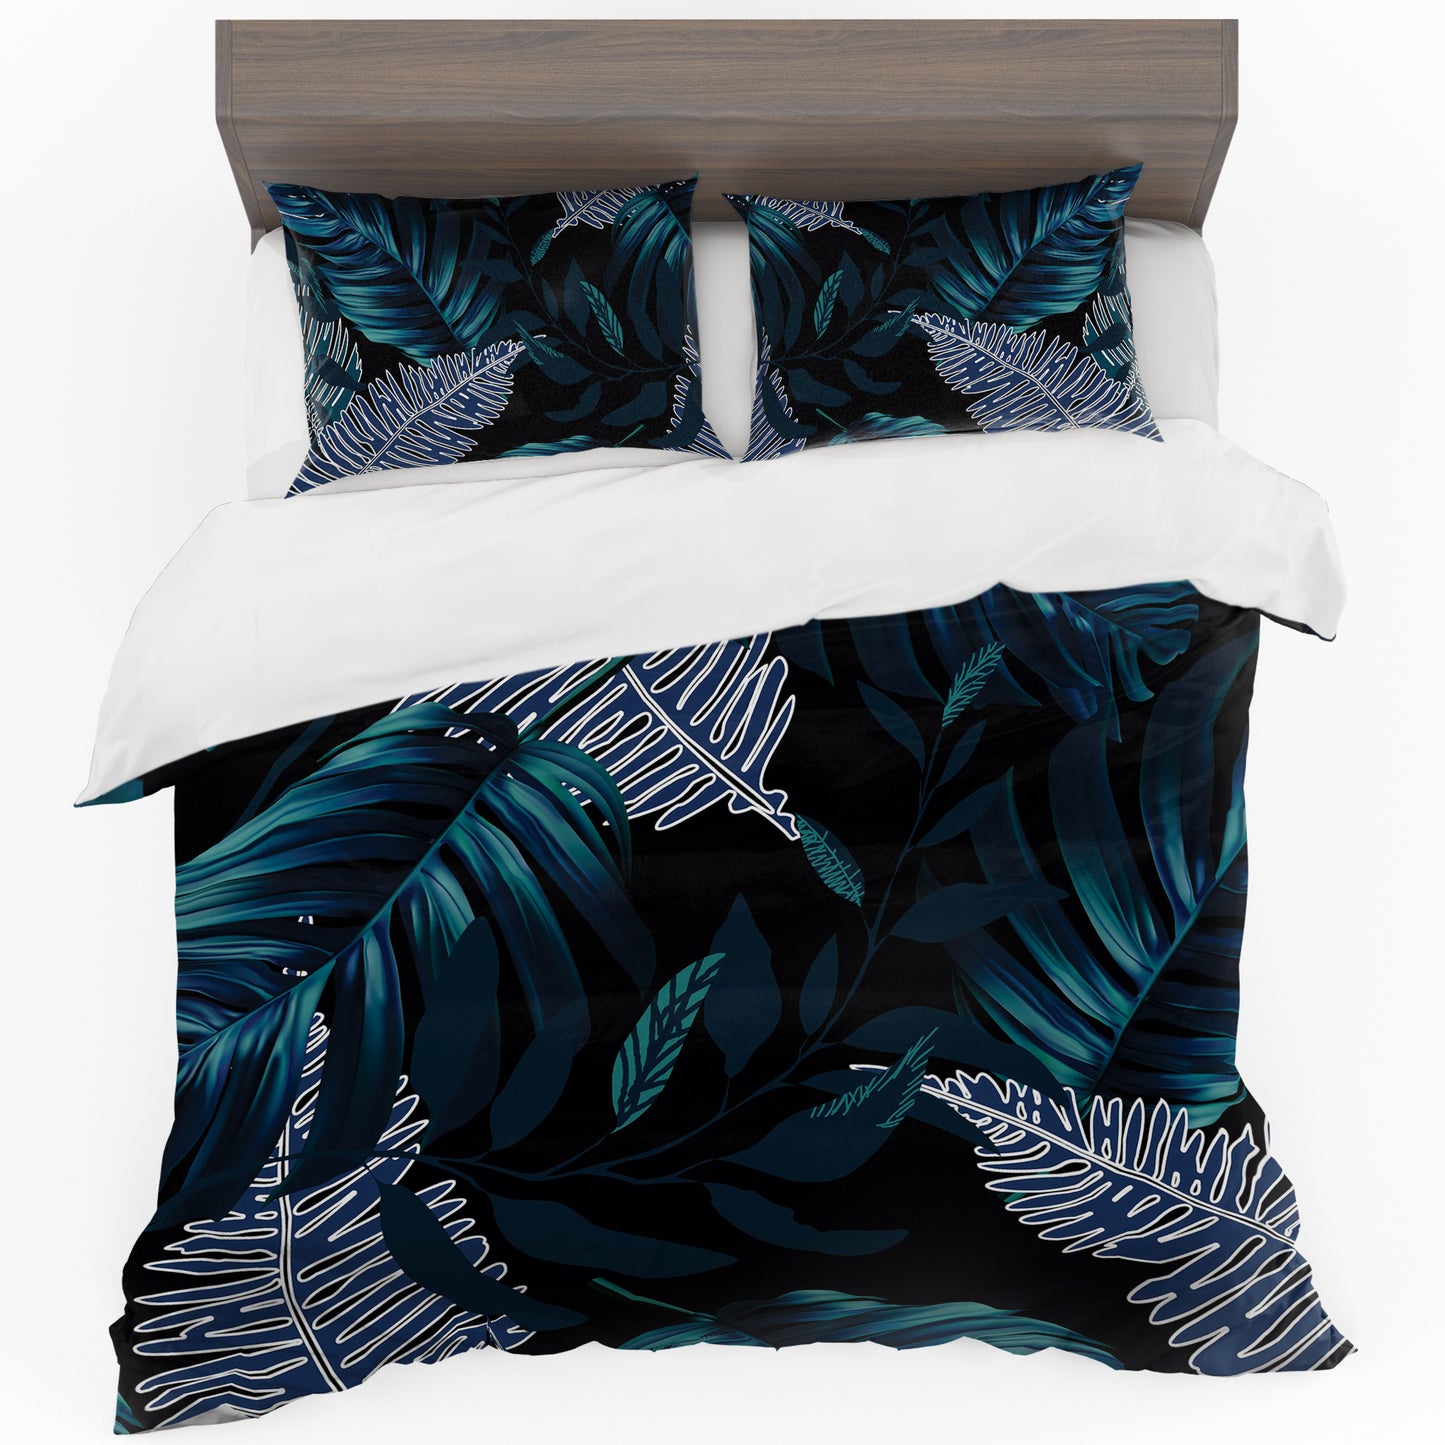 Shades of Blue Tropical Leaves Duvet Cover Set